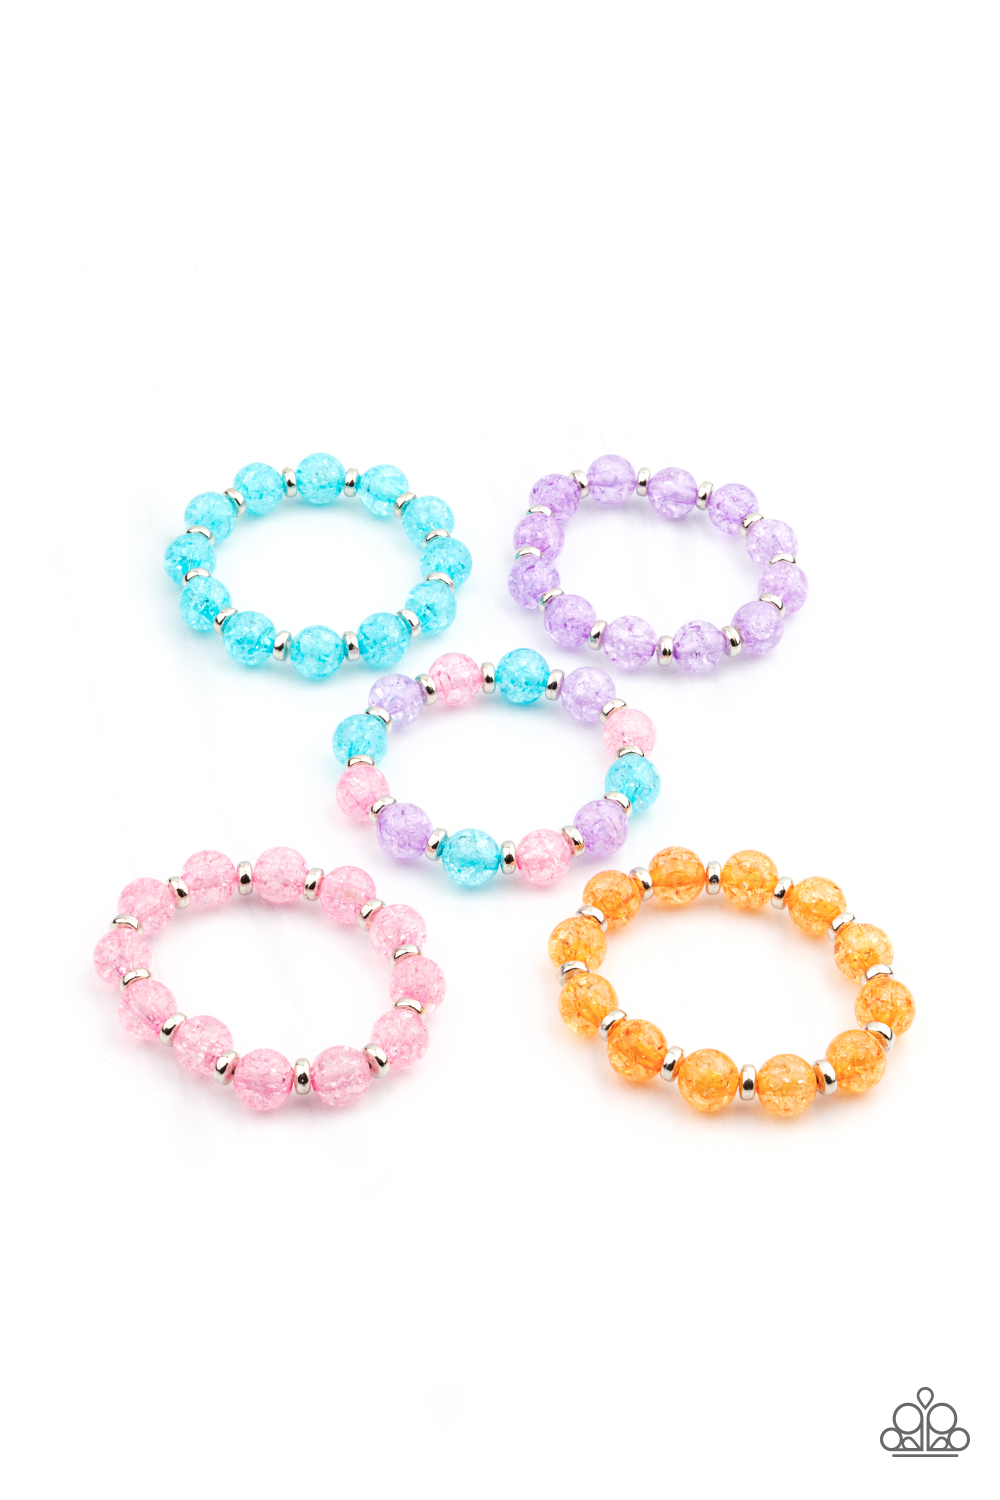 Icy Beads With Silver Accent Bracelets (3077)